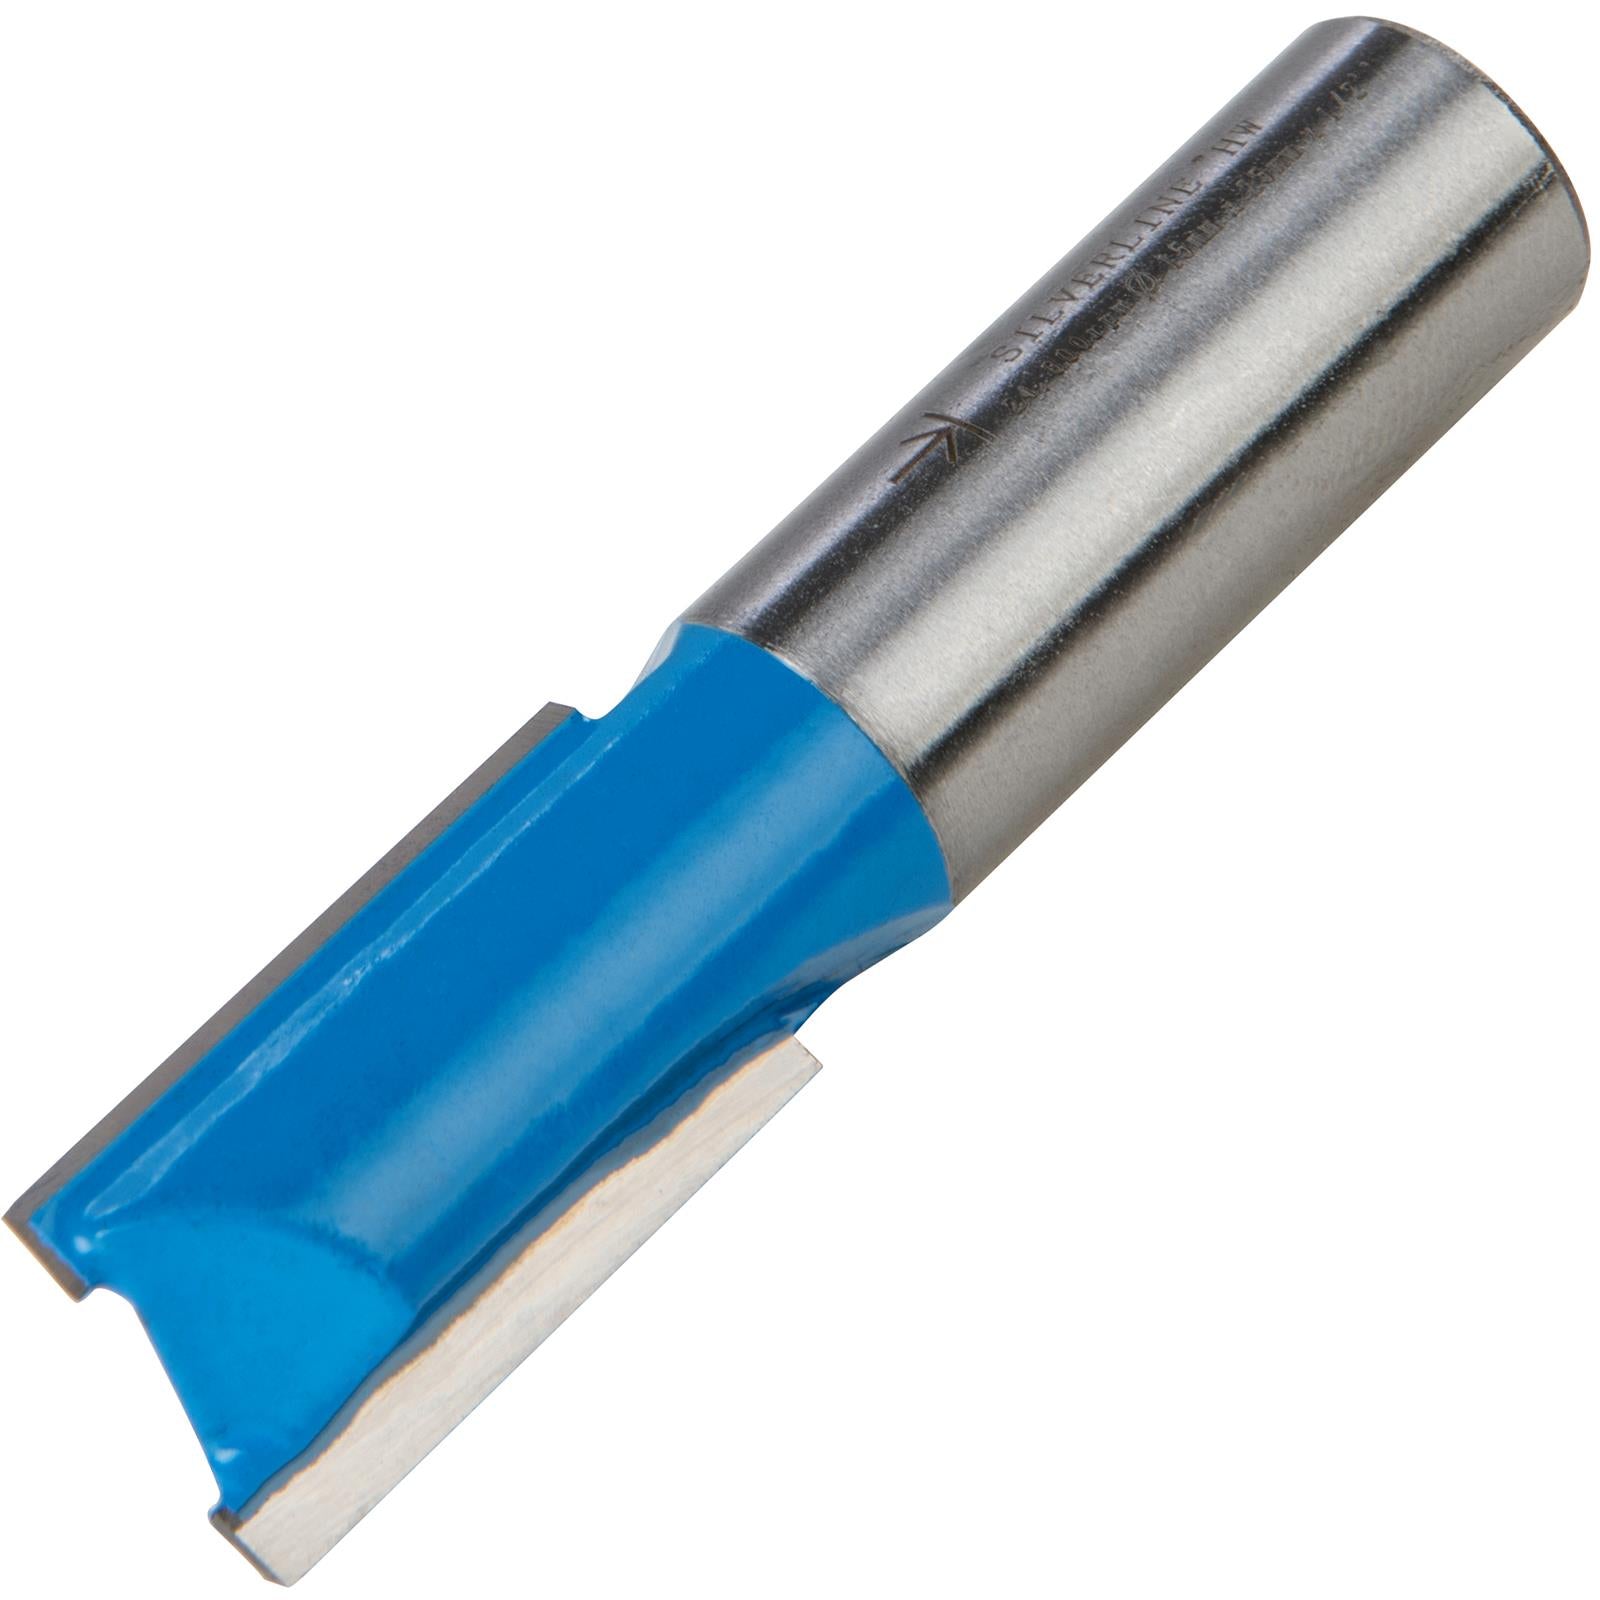 Silverline 1/2" Shank TCT Straight Metric Cutter Router Bits